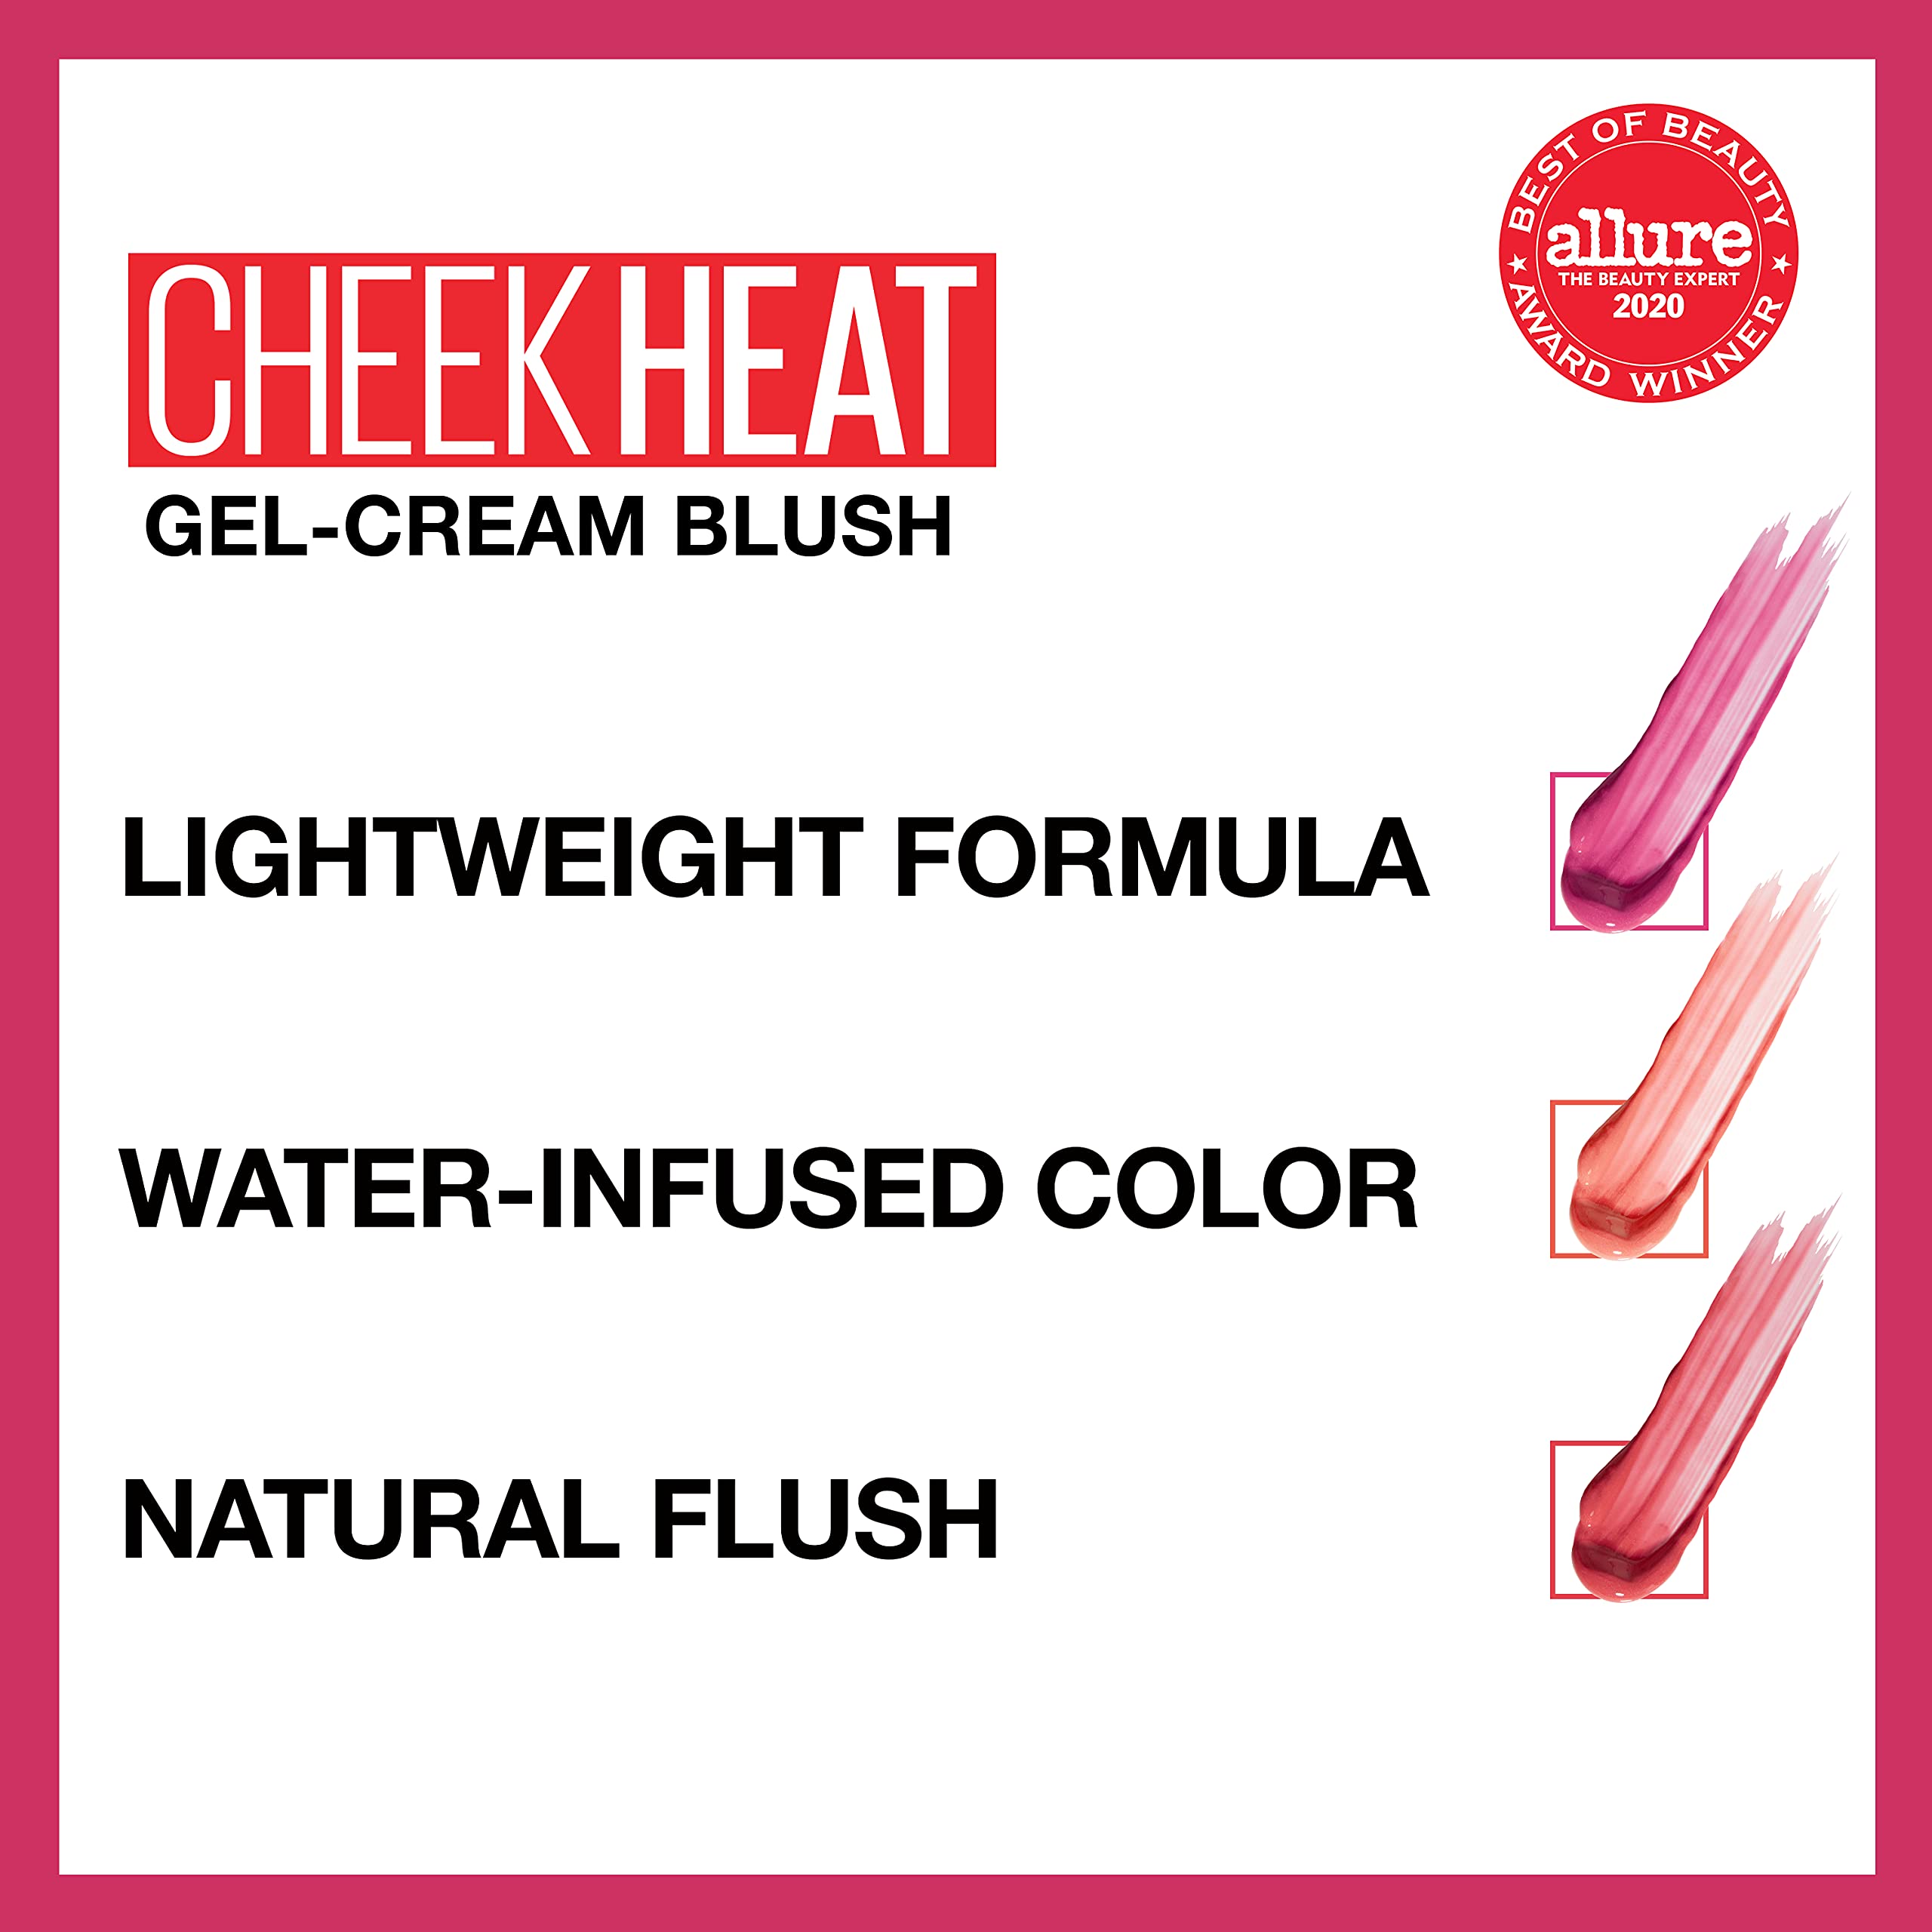 Maybelline New York Cheek Heat Gel-Cream Blush Makeup, Lightweight, Breathable Feel, Sheer Flush Of Color, Natural-Looking, Dewy Finish, Oil-Free, Nude Burn, 1 Count